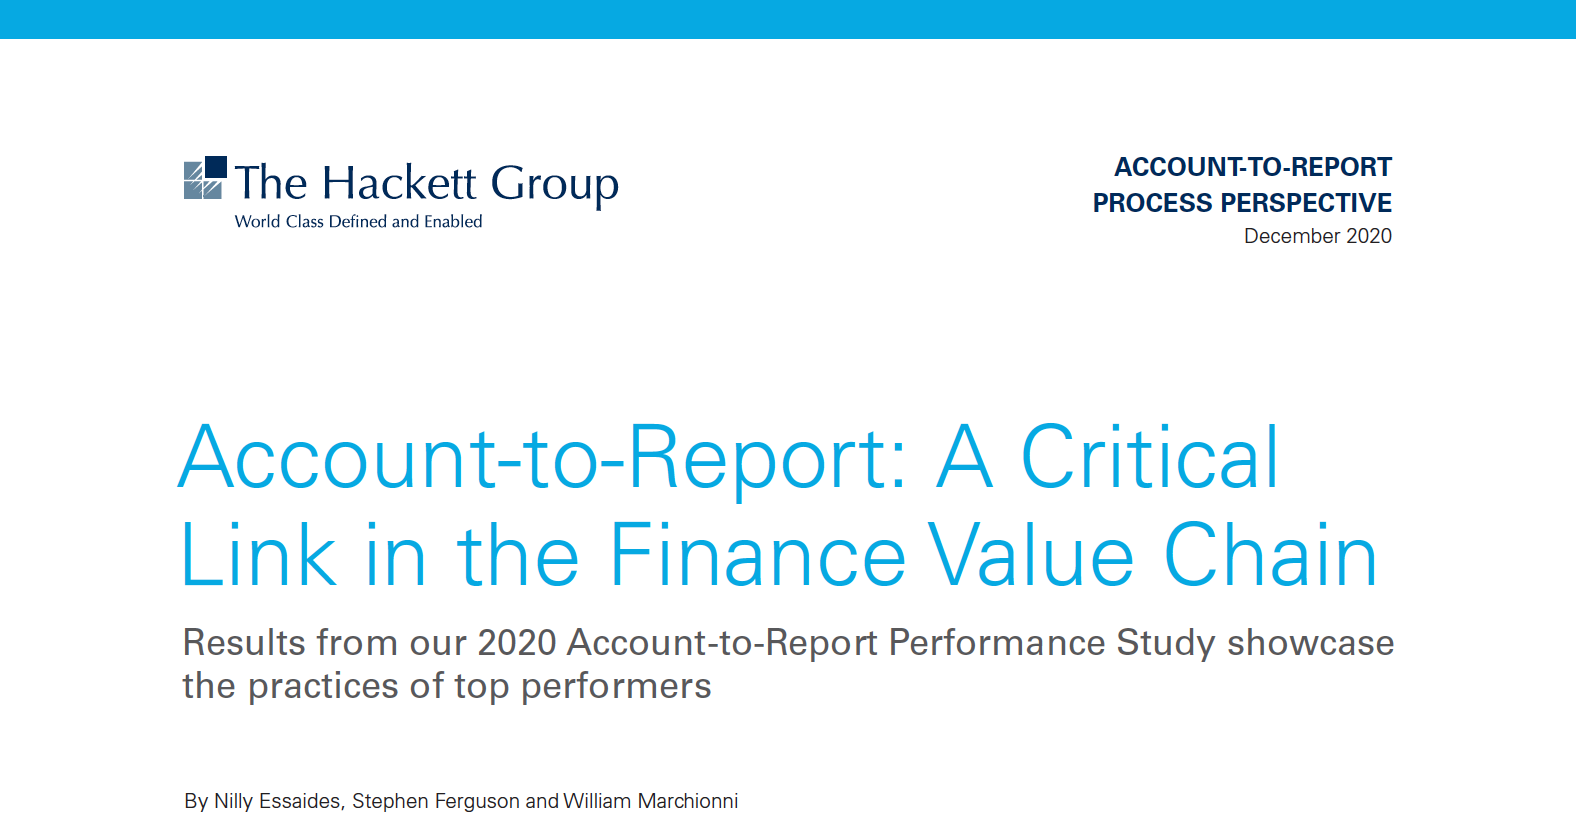 Account-to-Report: A Critical Link in the Finance Value Chain